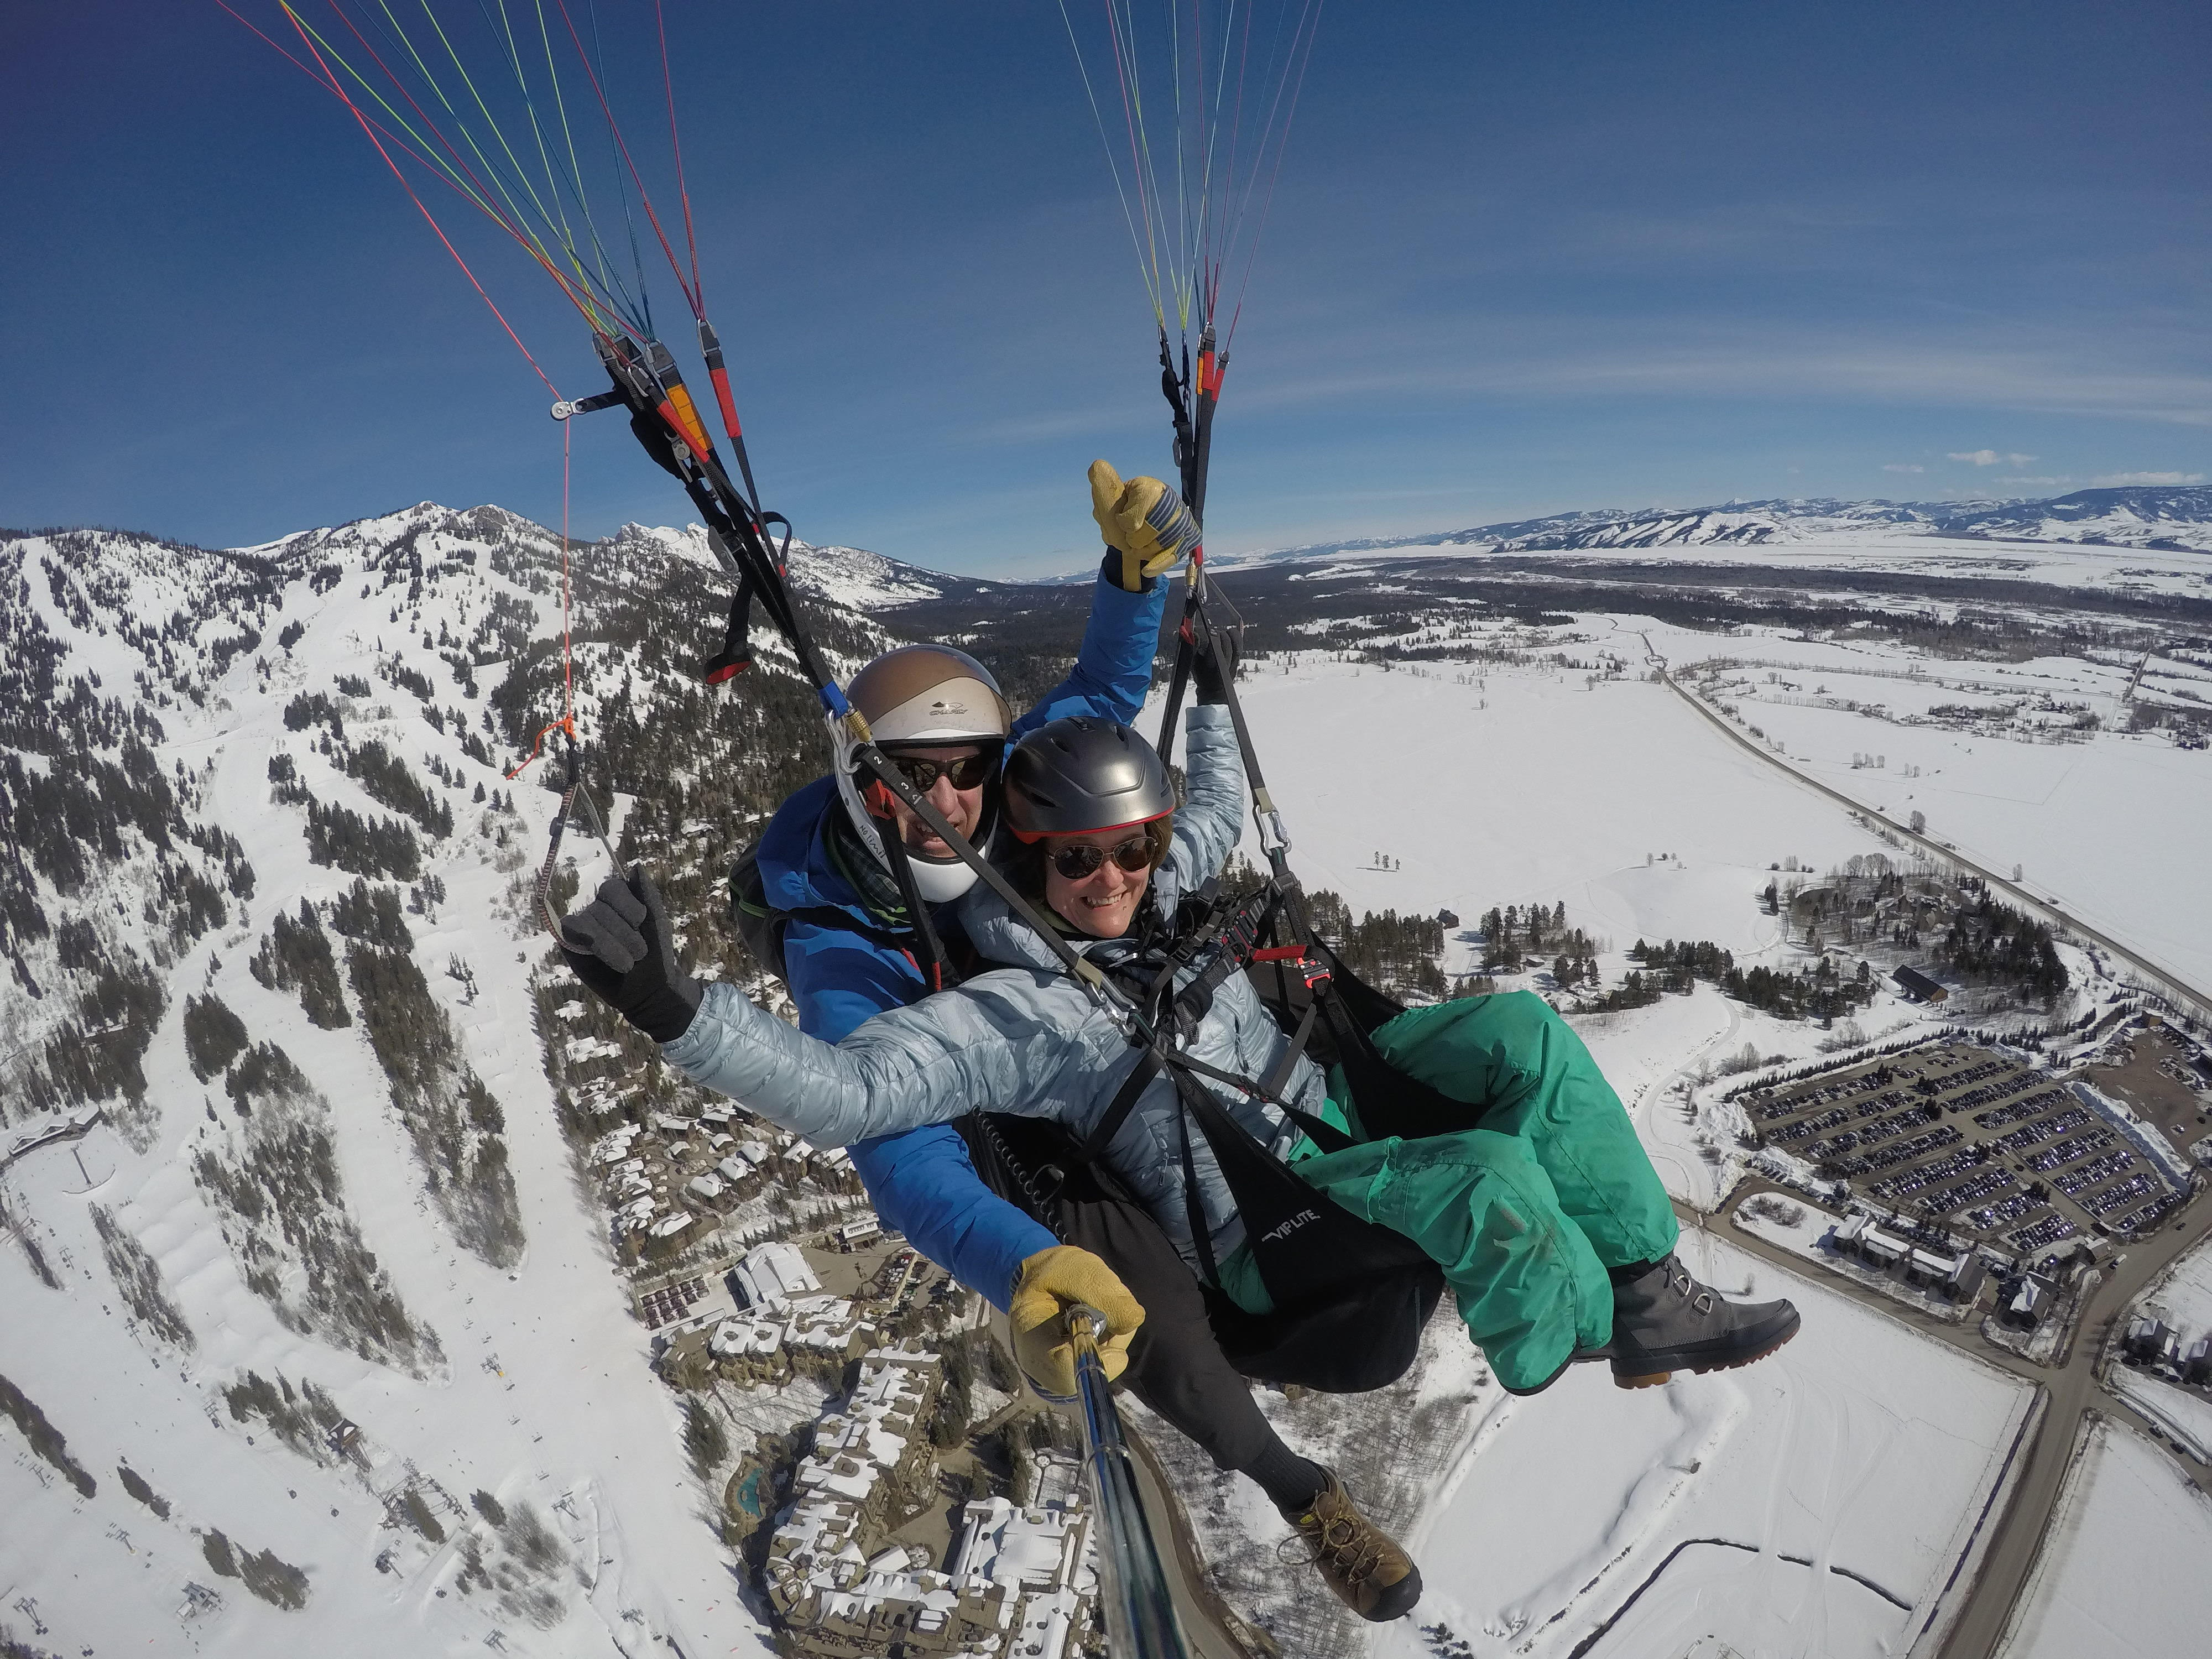 Soar the Skies with Tandem Paragliding